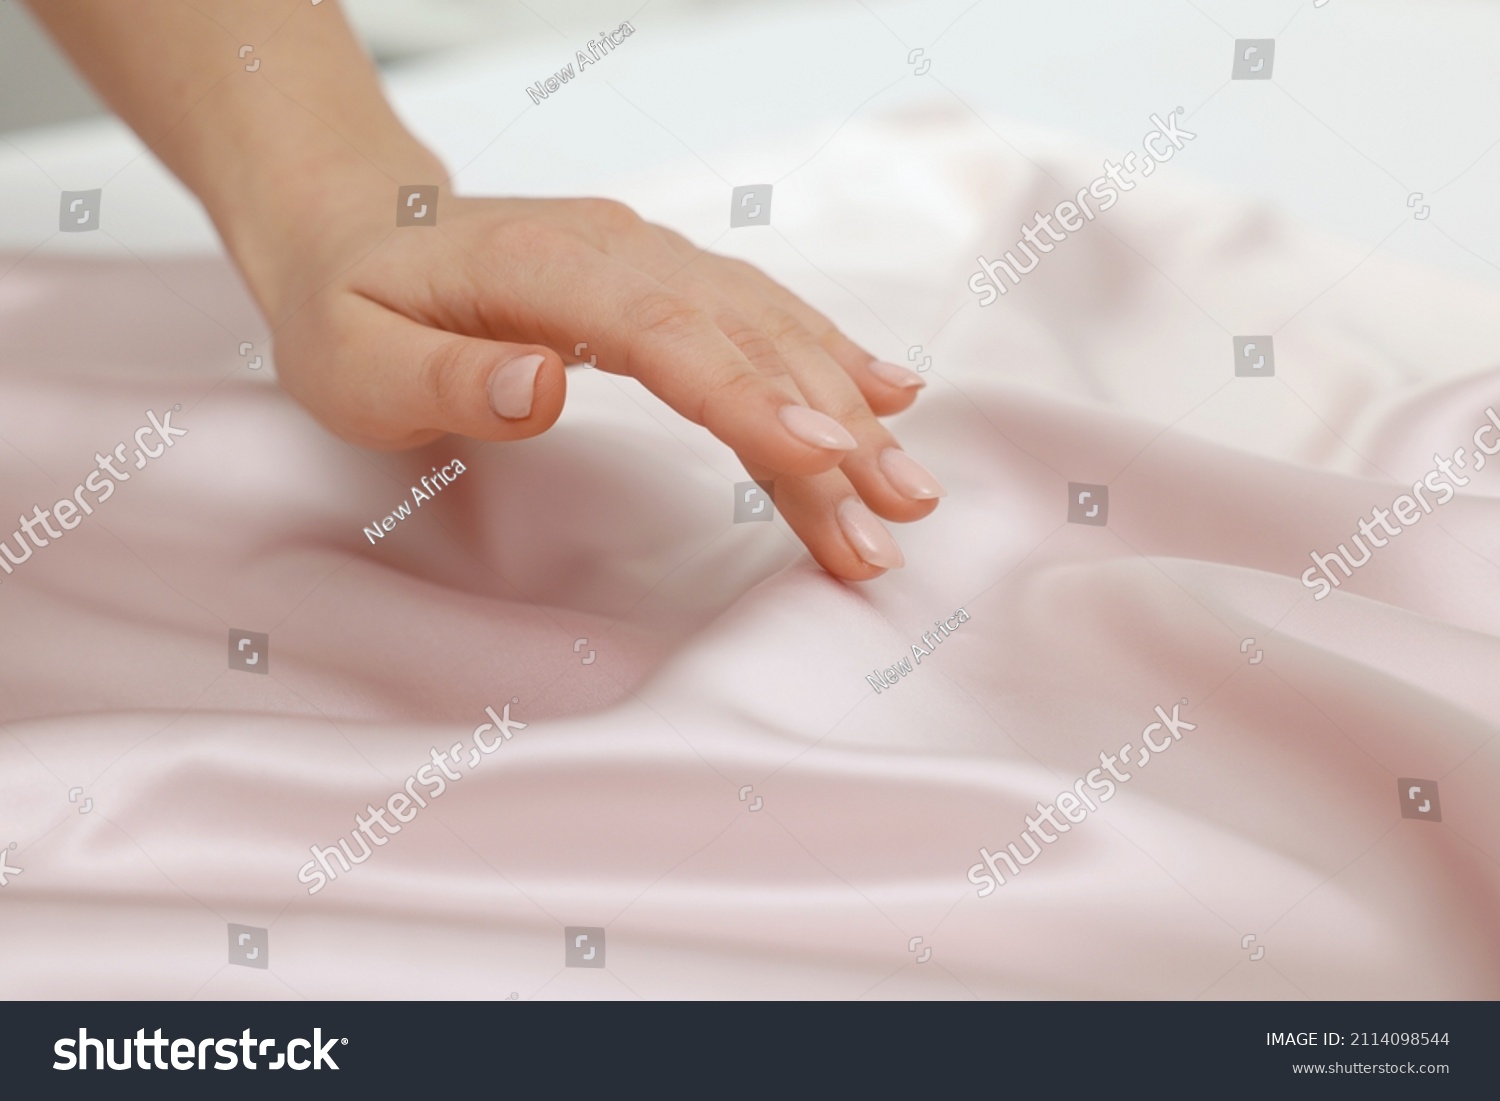 Woman touching smooth silky fabric, closeup view #2114098544